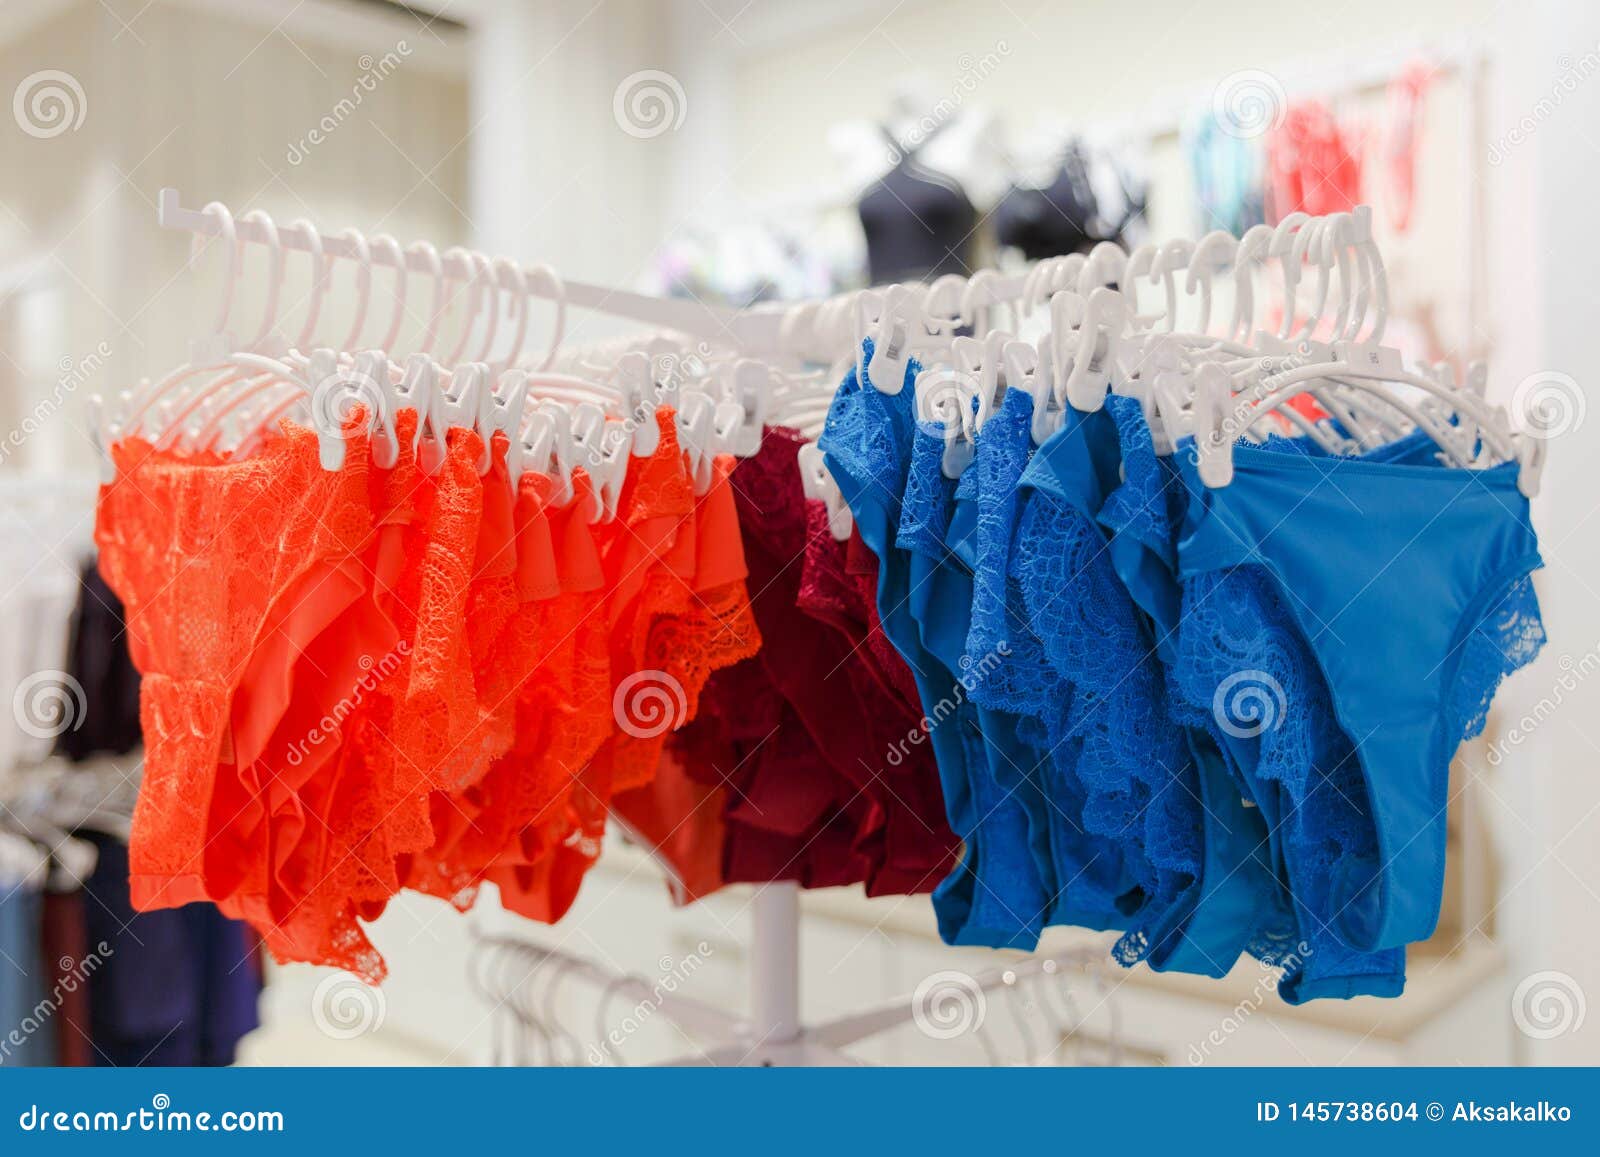 Shop Woman Underwear Panties in the Shopping Mall Stock Photo